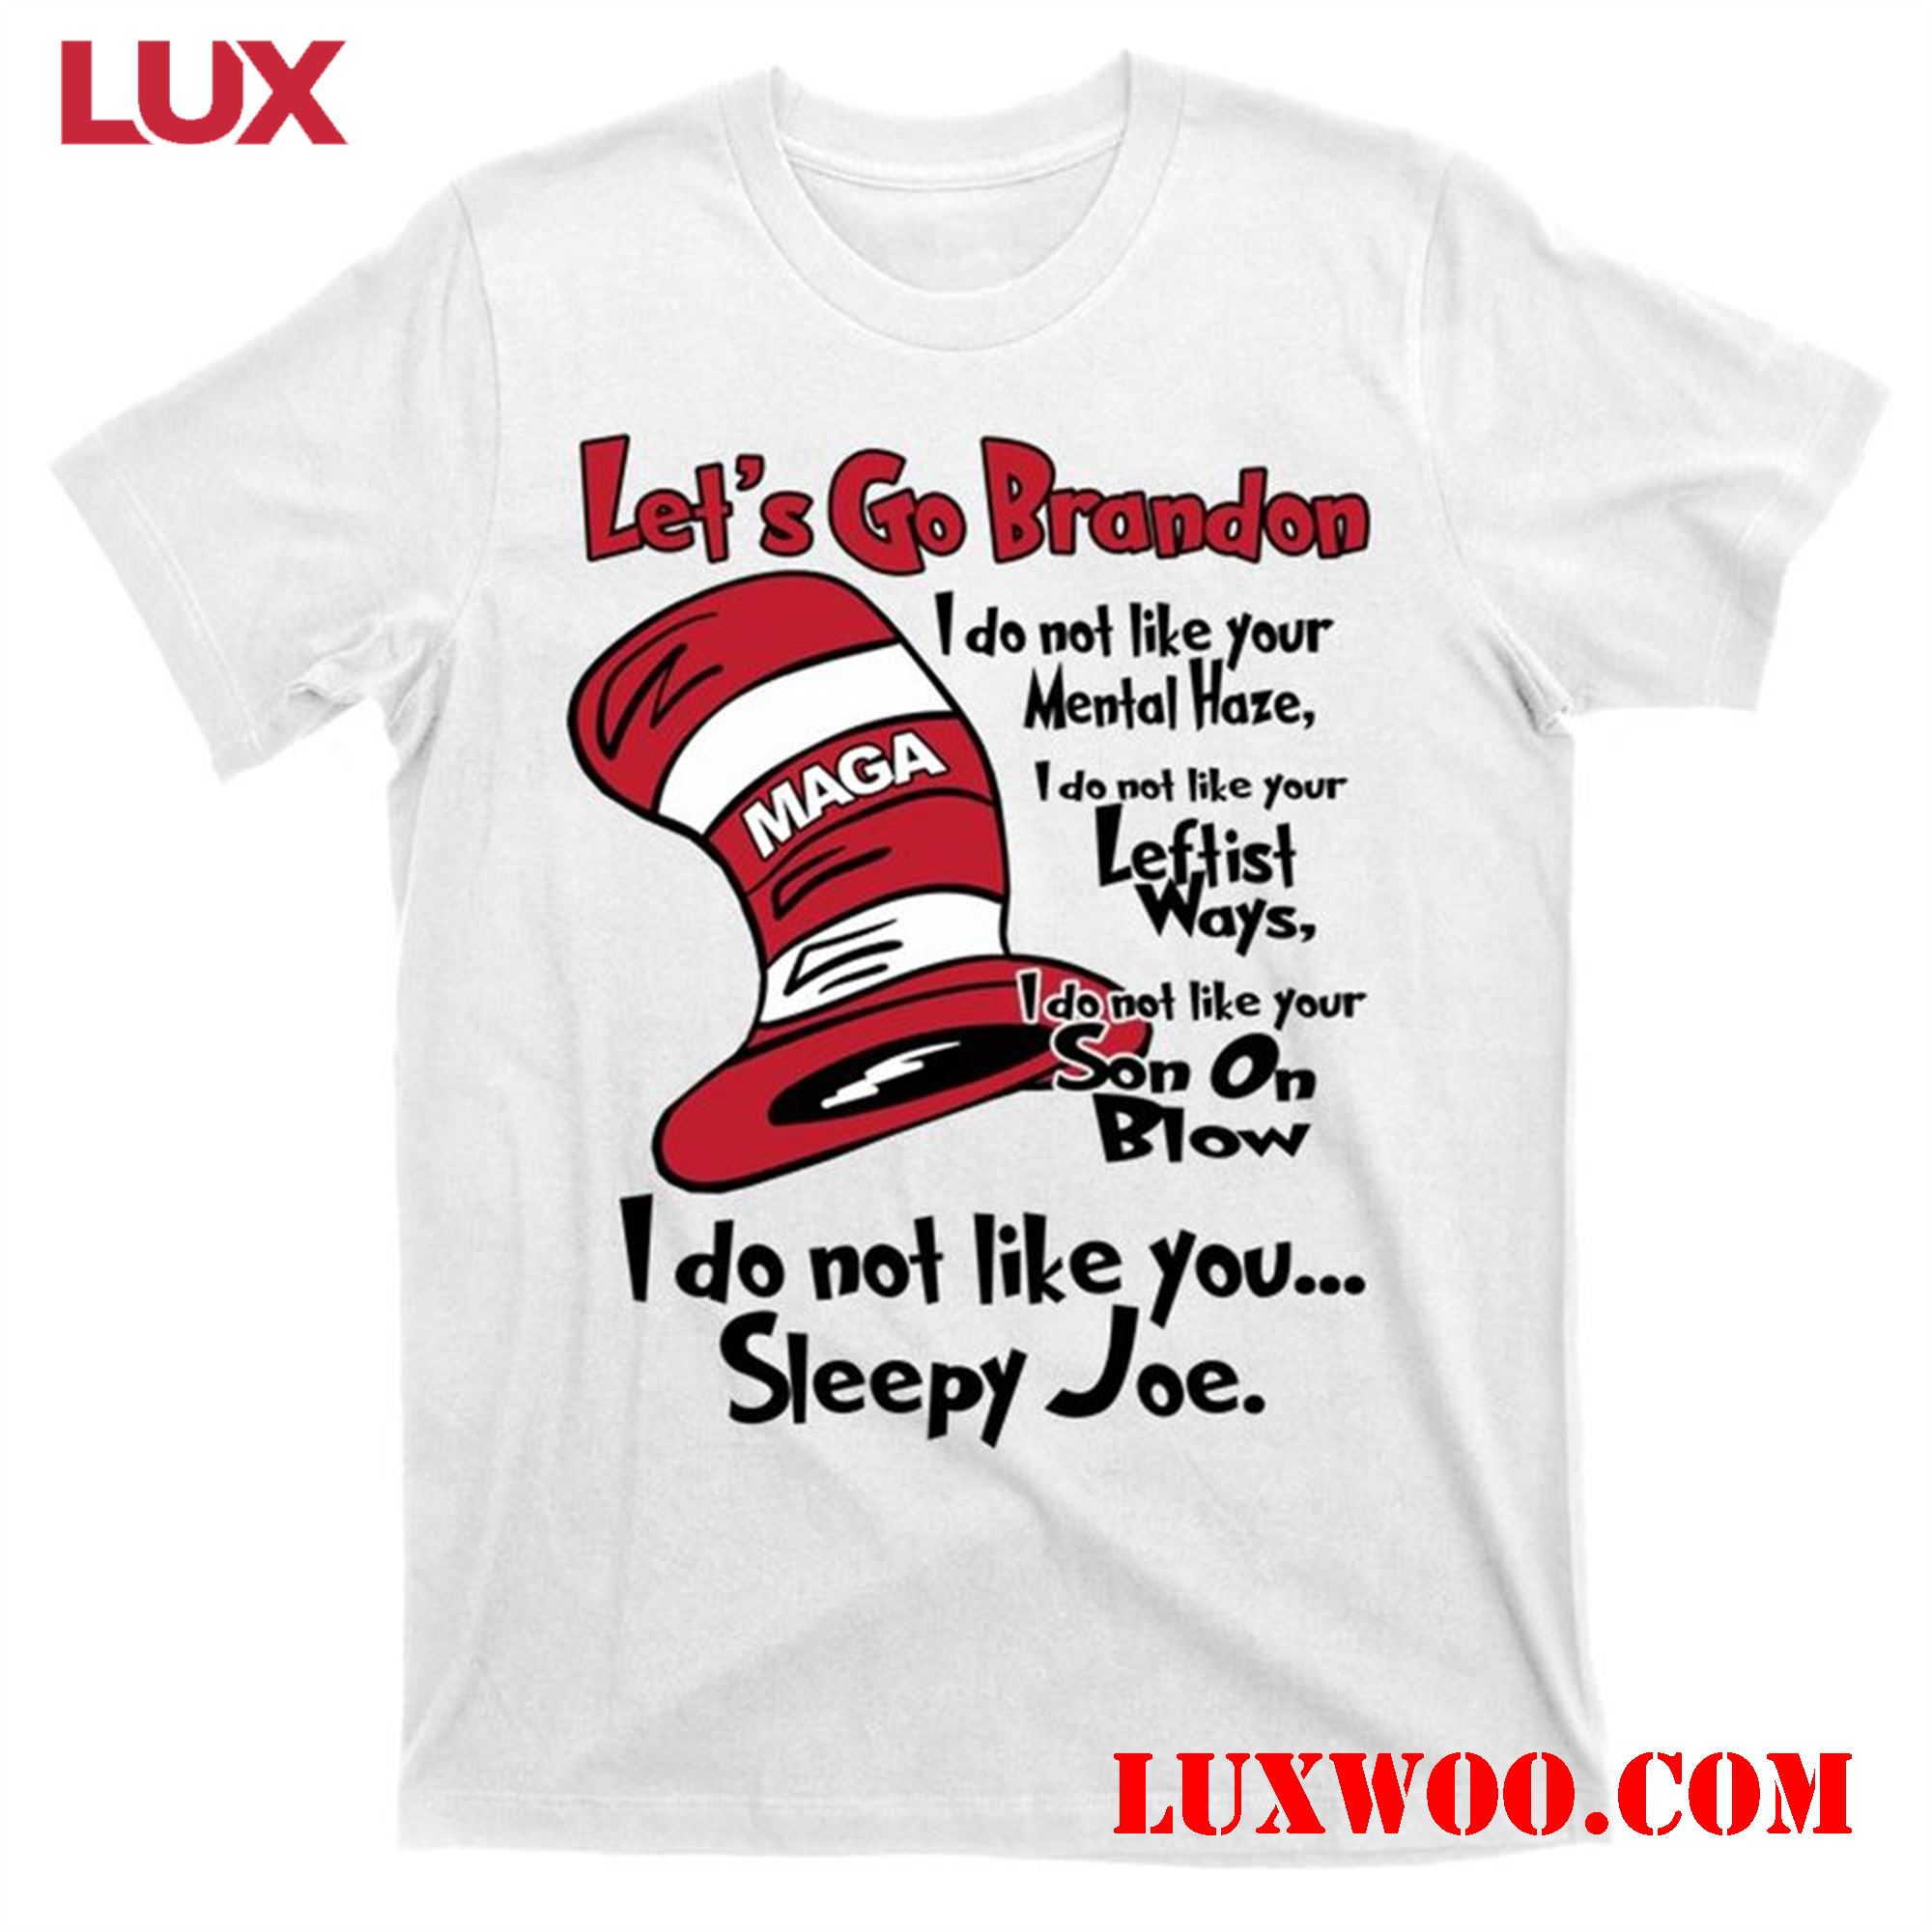 Get Your Chuckles With The Let's Go Brandon Cat In The Hat Maga Shirt